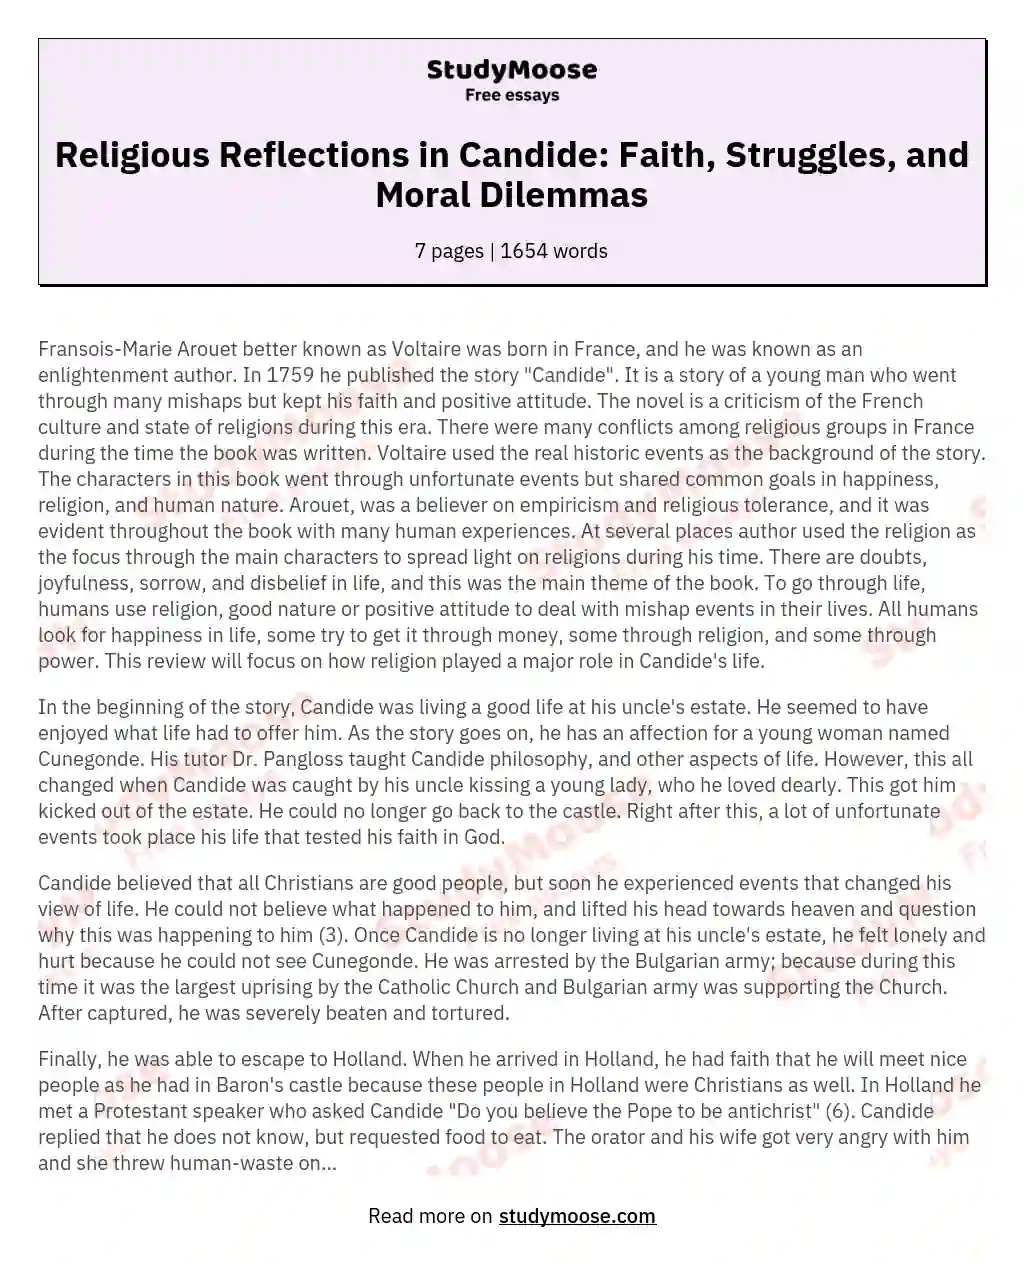 Religious Reflections in Candide: Faith, Struggles, and Moral Dilemmas essay